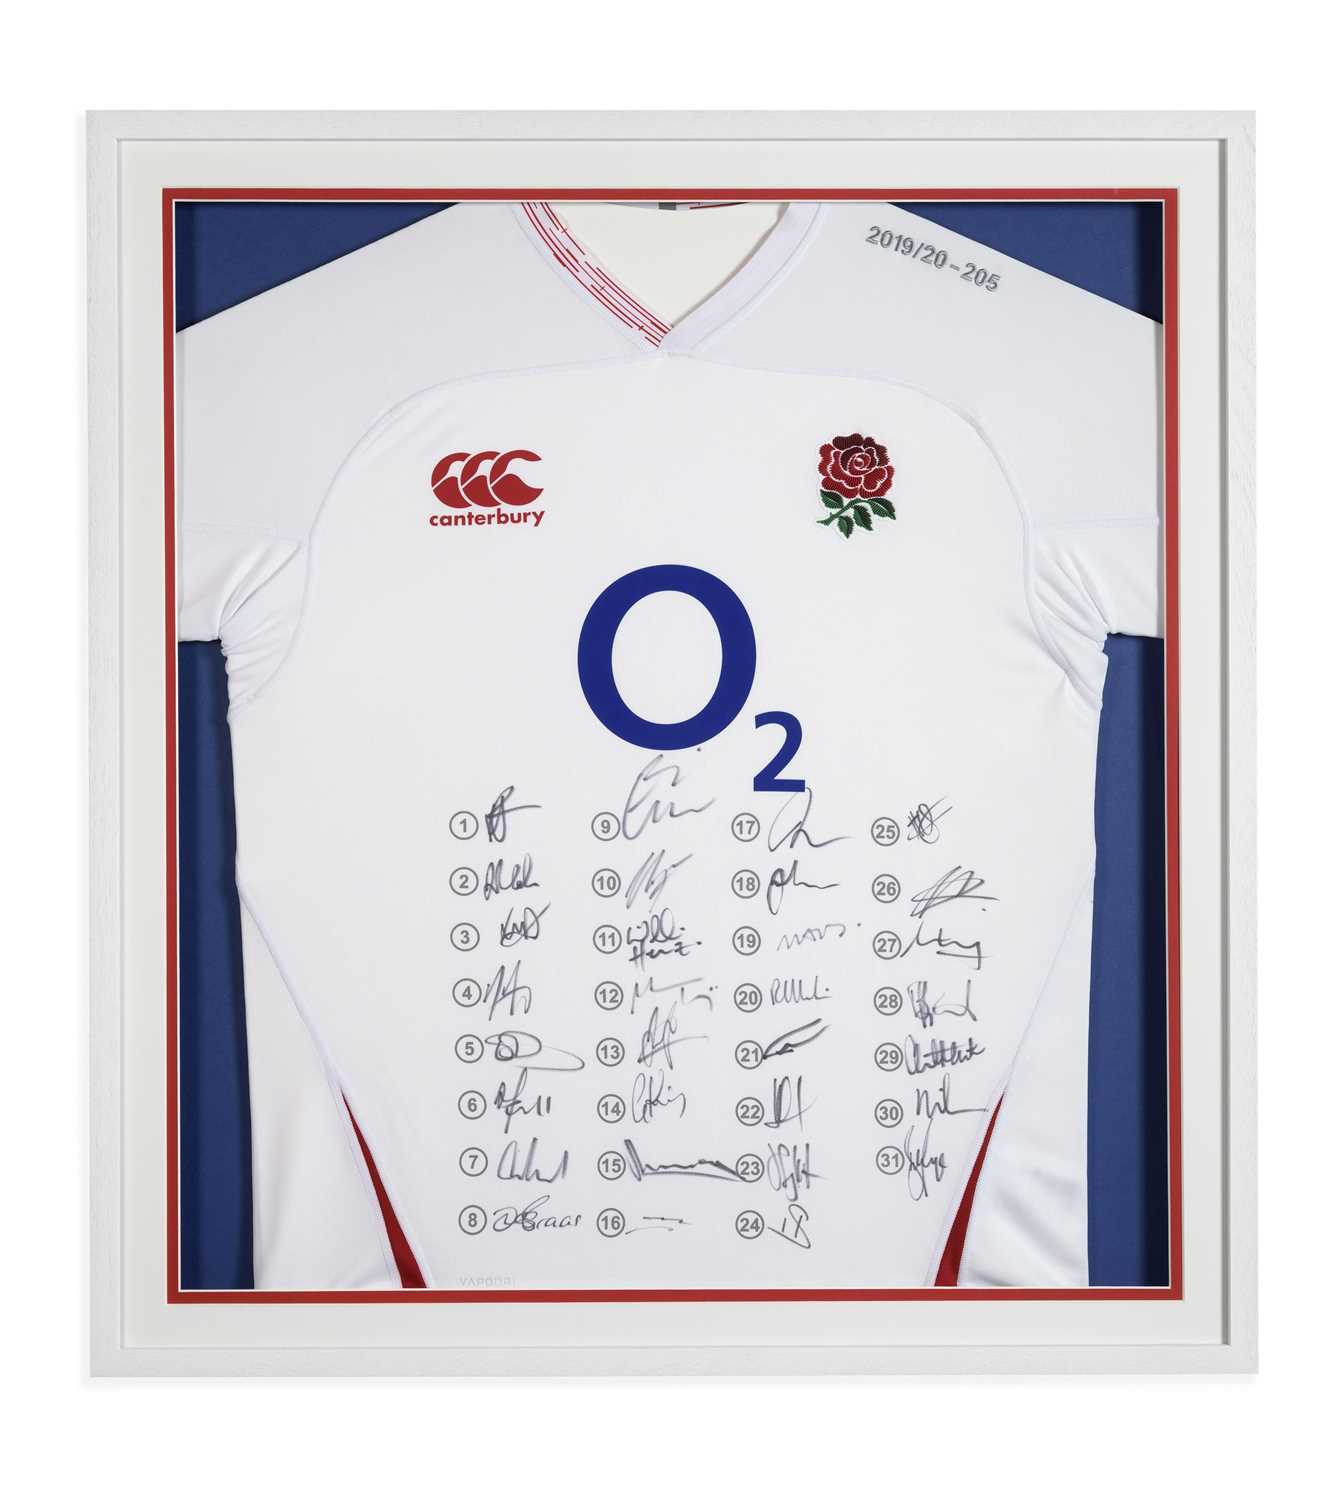 England Rugby Shirt Signed by the 2020 Team Official framed current England Rugby shirt which has